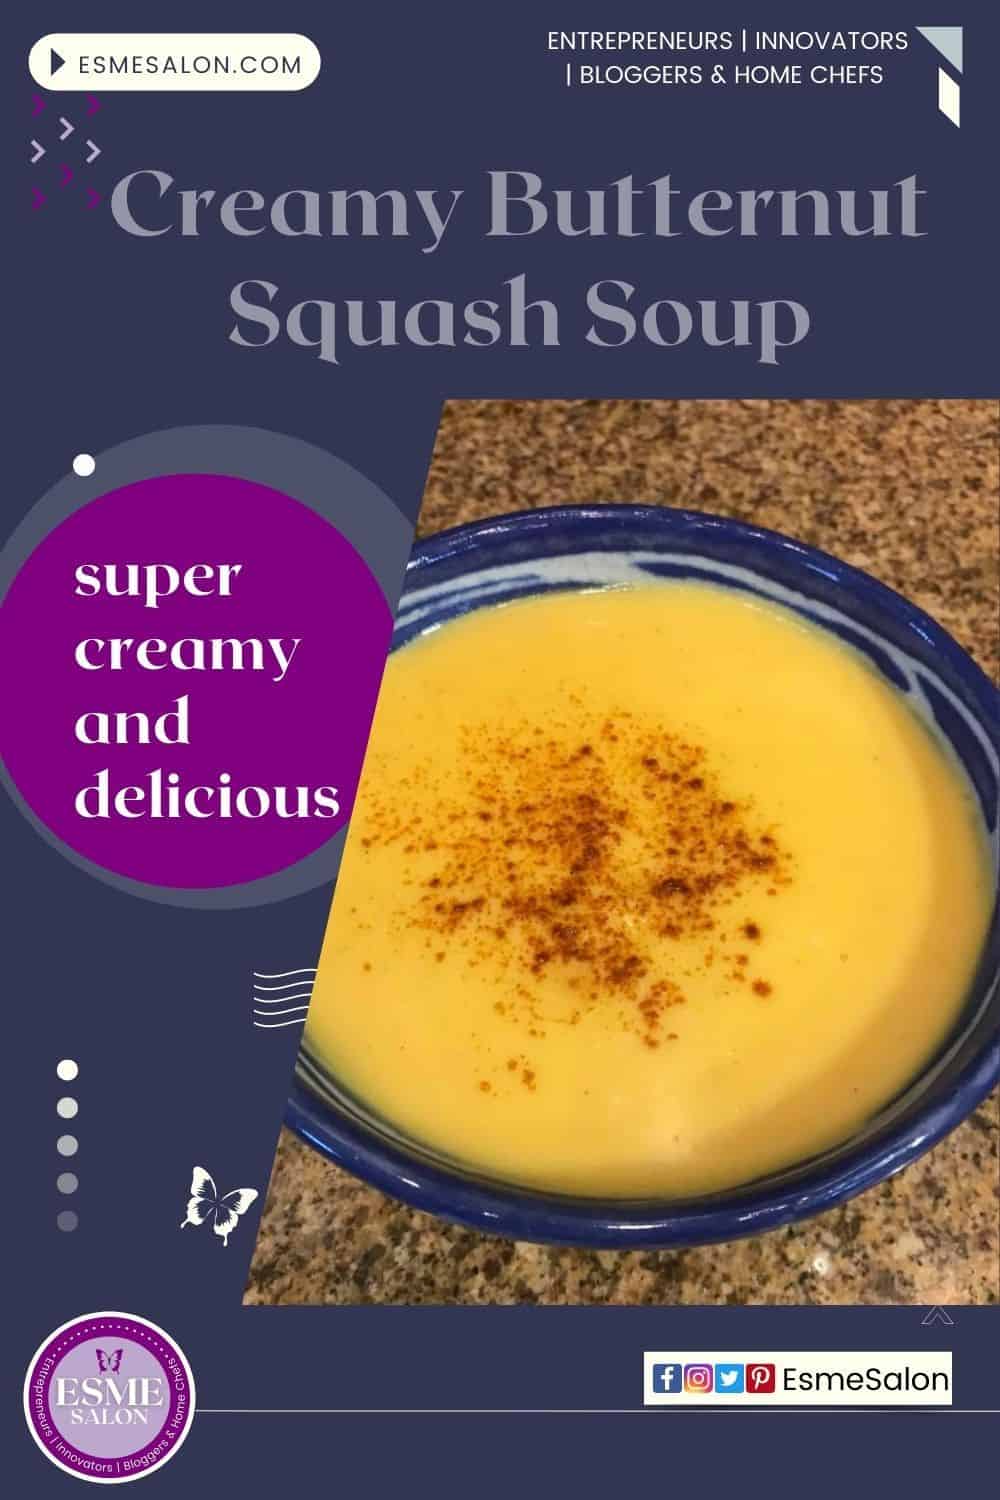 an image of a blue soup bowl with Creamy Butternut Squash Soup